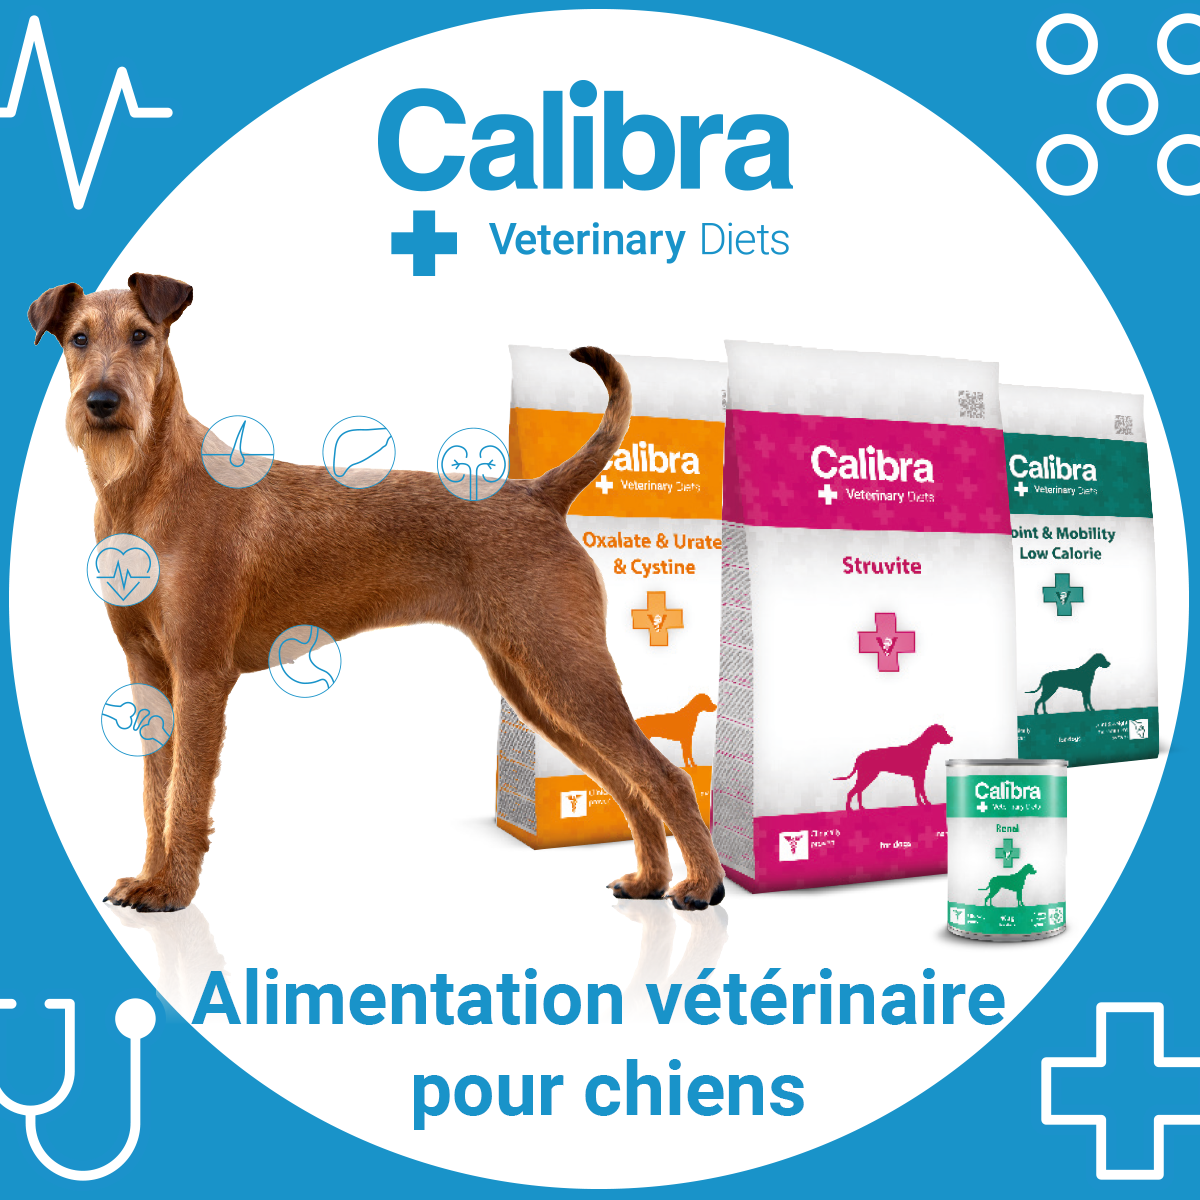 Calibra Veterinary Diets for Dogs